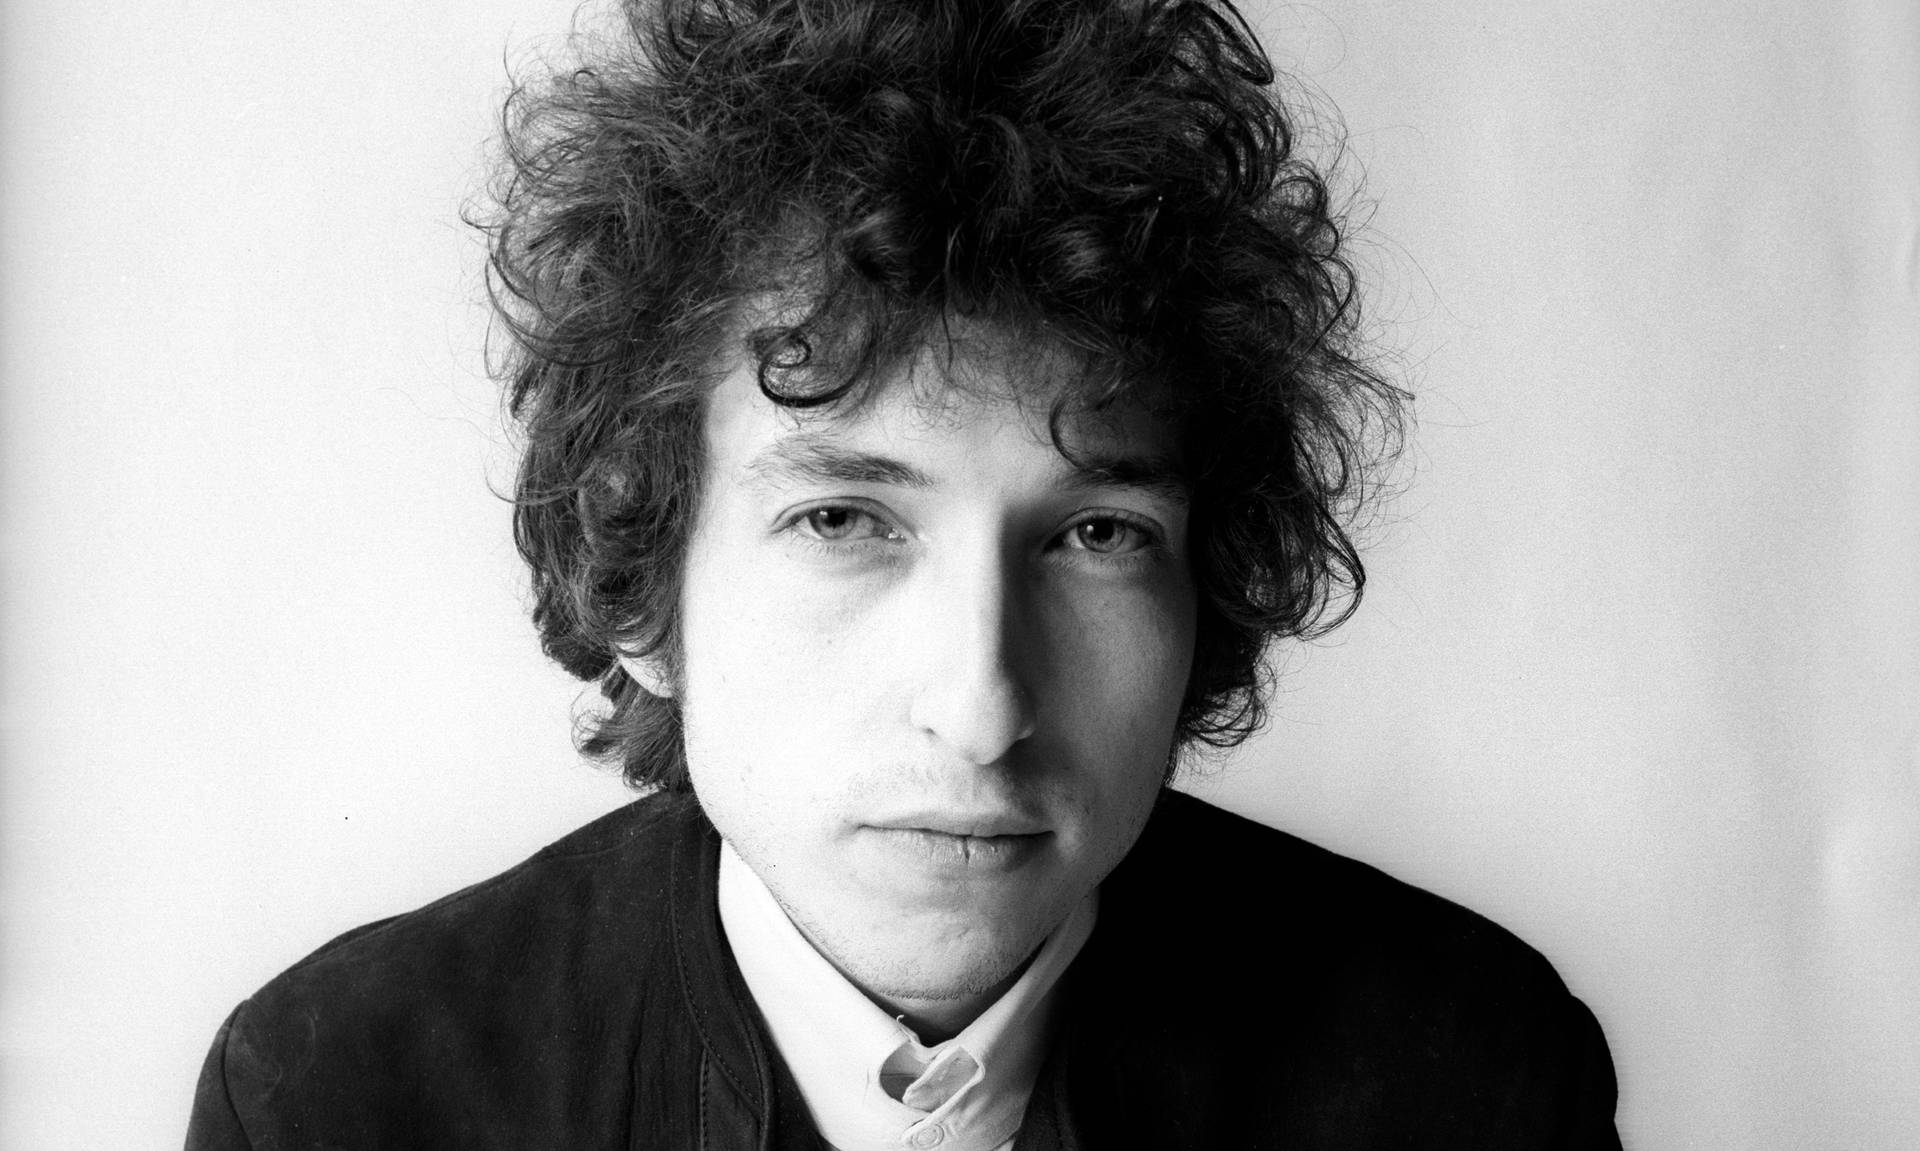 Iconic Black and White Portrait of Renowned Musician Bob Dylan Wallpaper